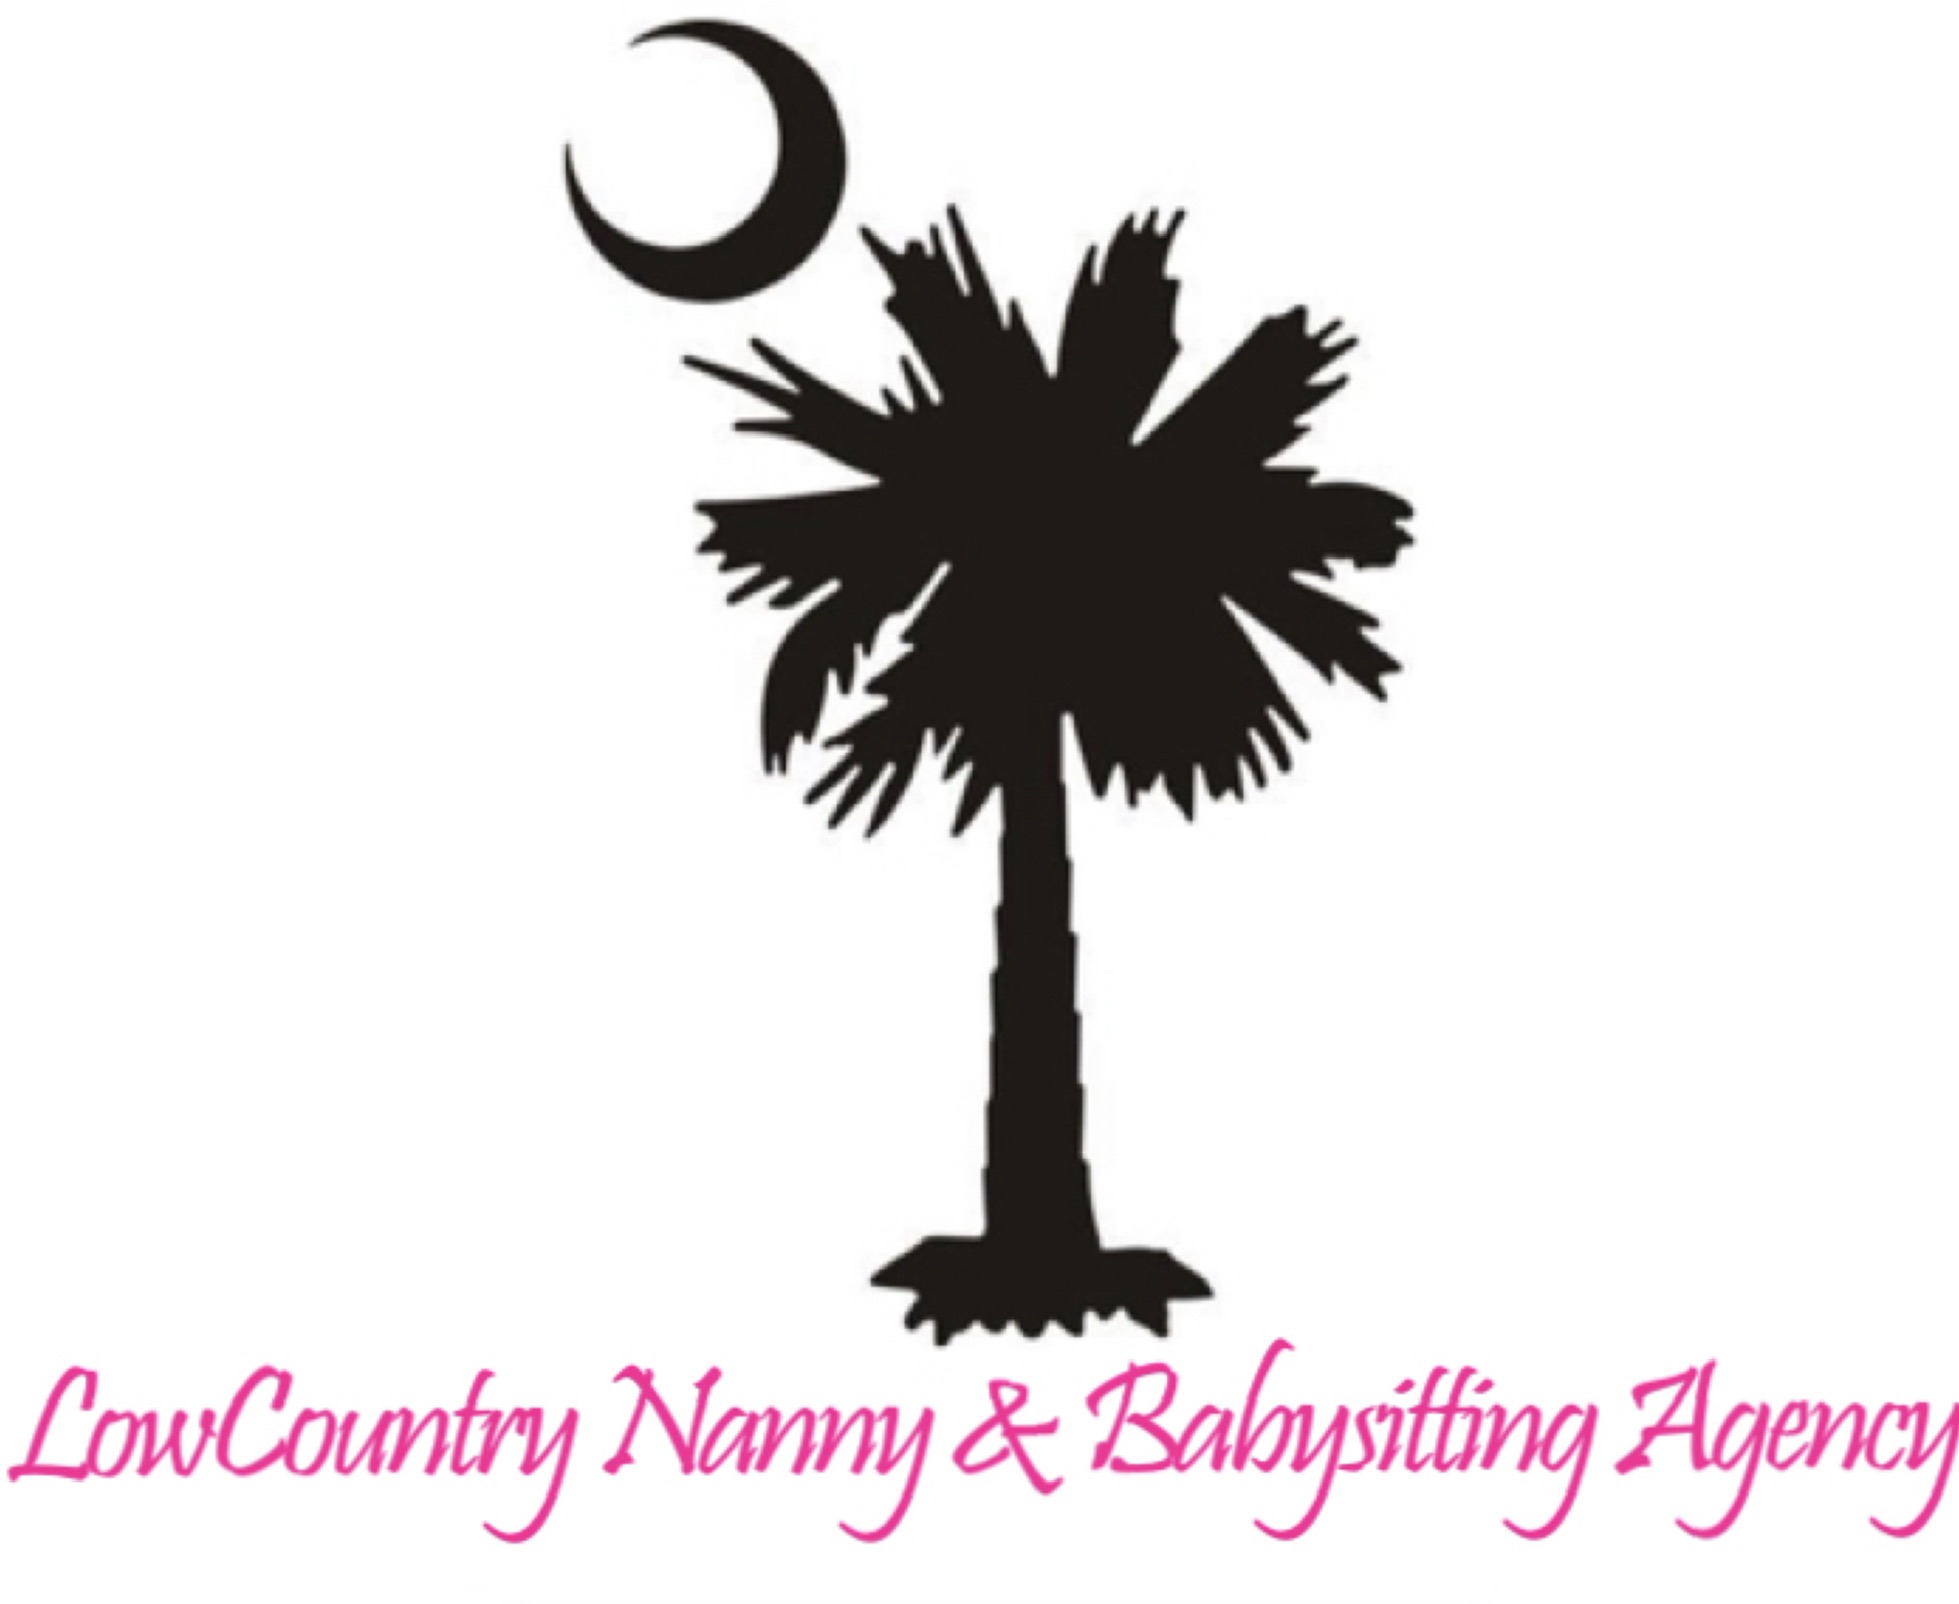 LowCountry Nanny and Babysitting Agency Families!